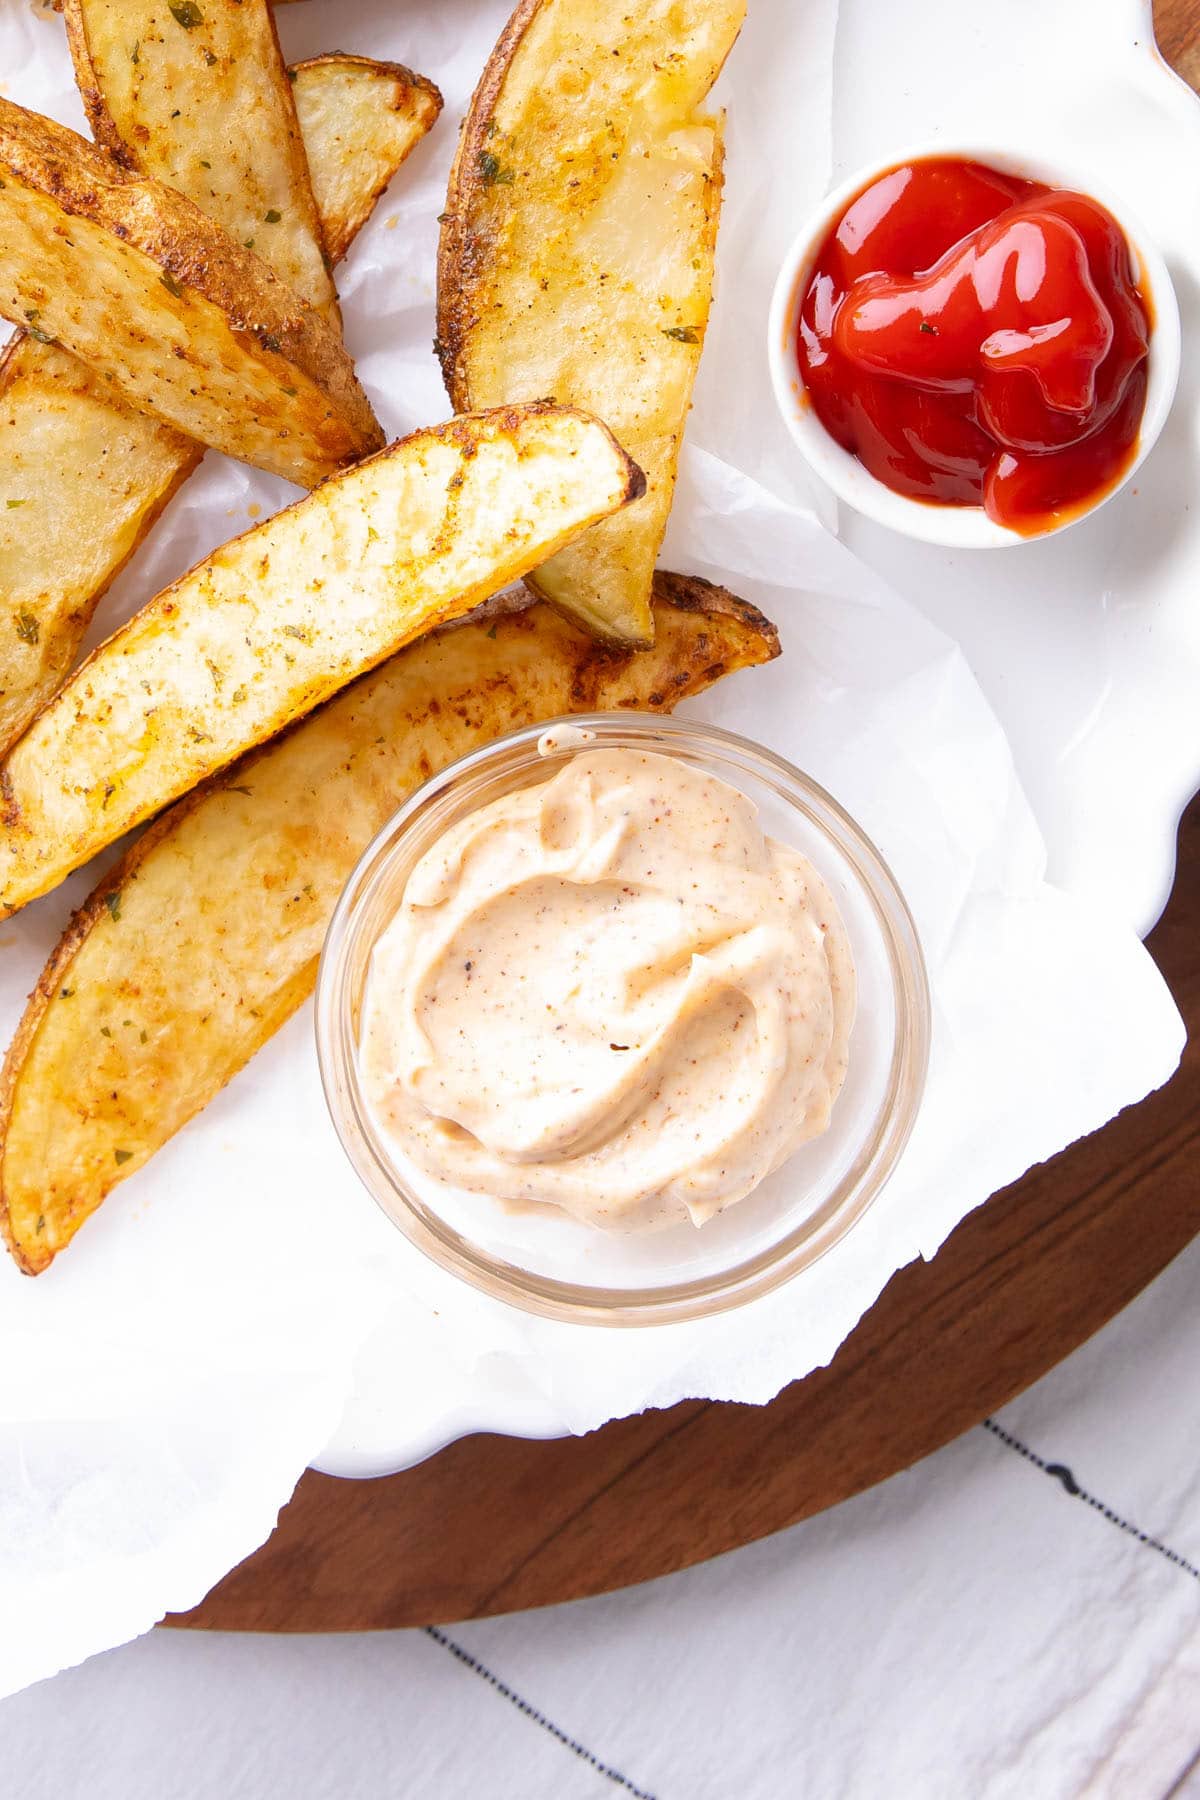 Top view of a dip bowl filled with this spicy and creamy pepper sauce served with a fried appetizer and ketchup